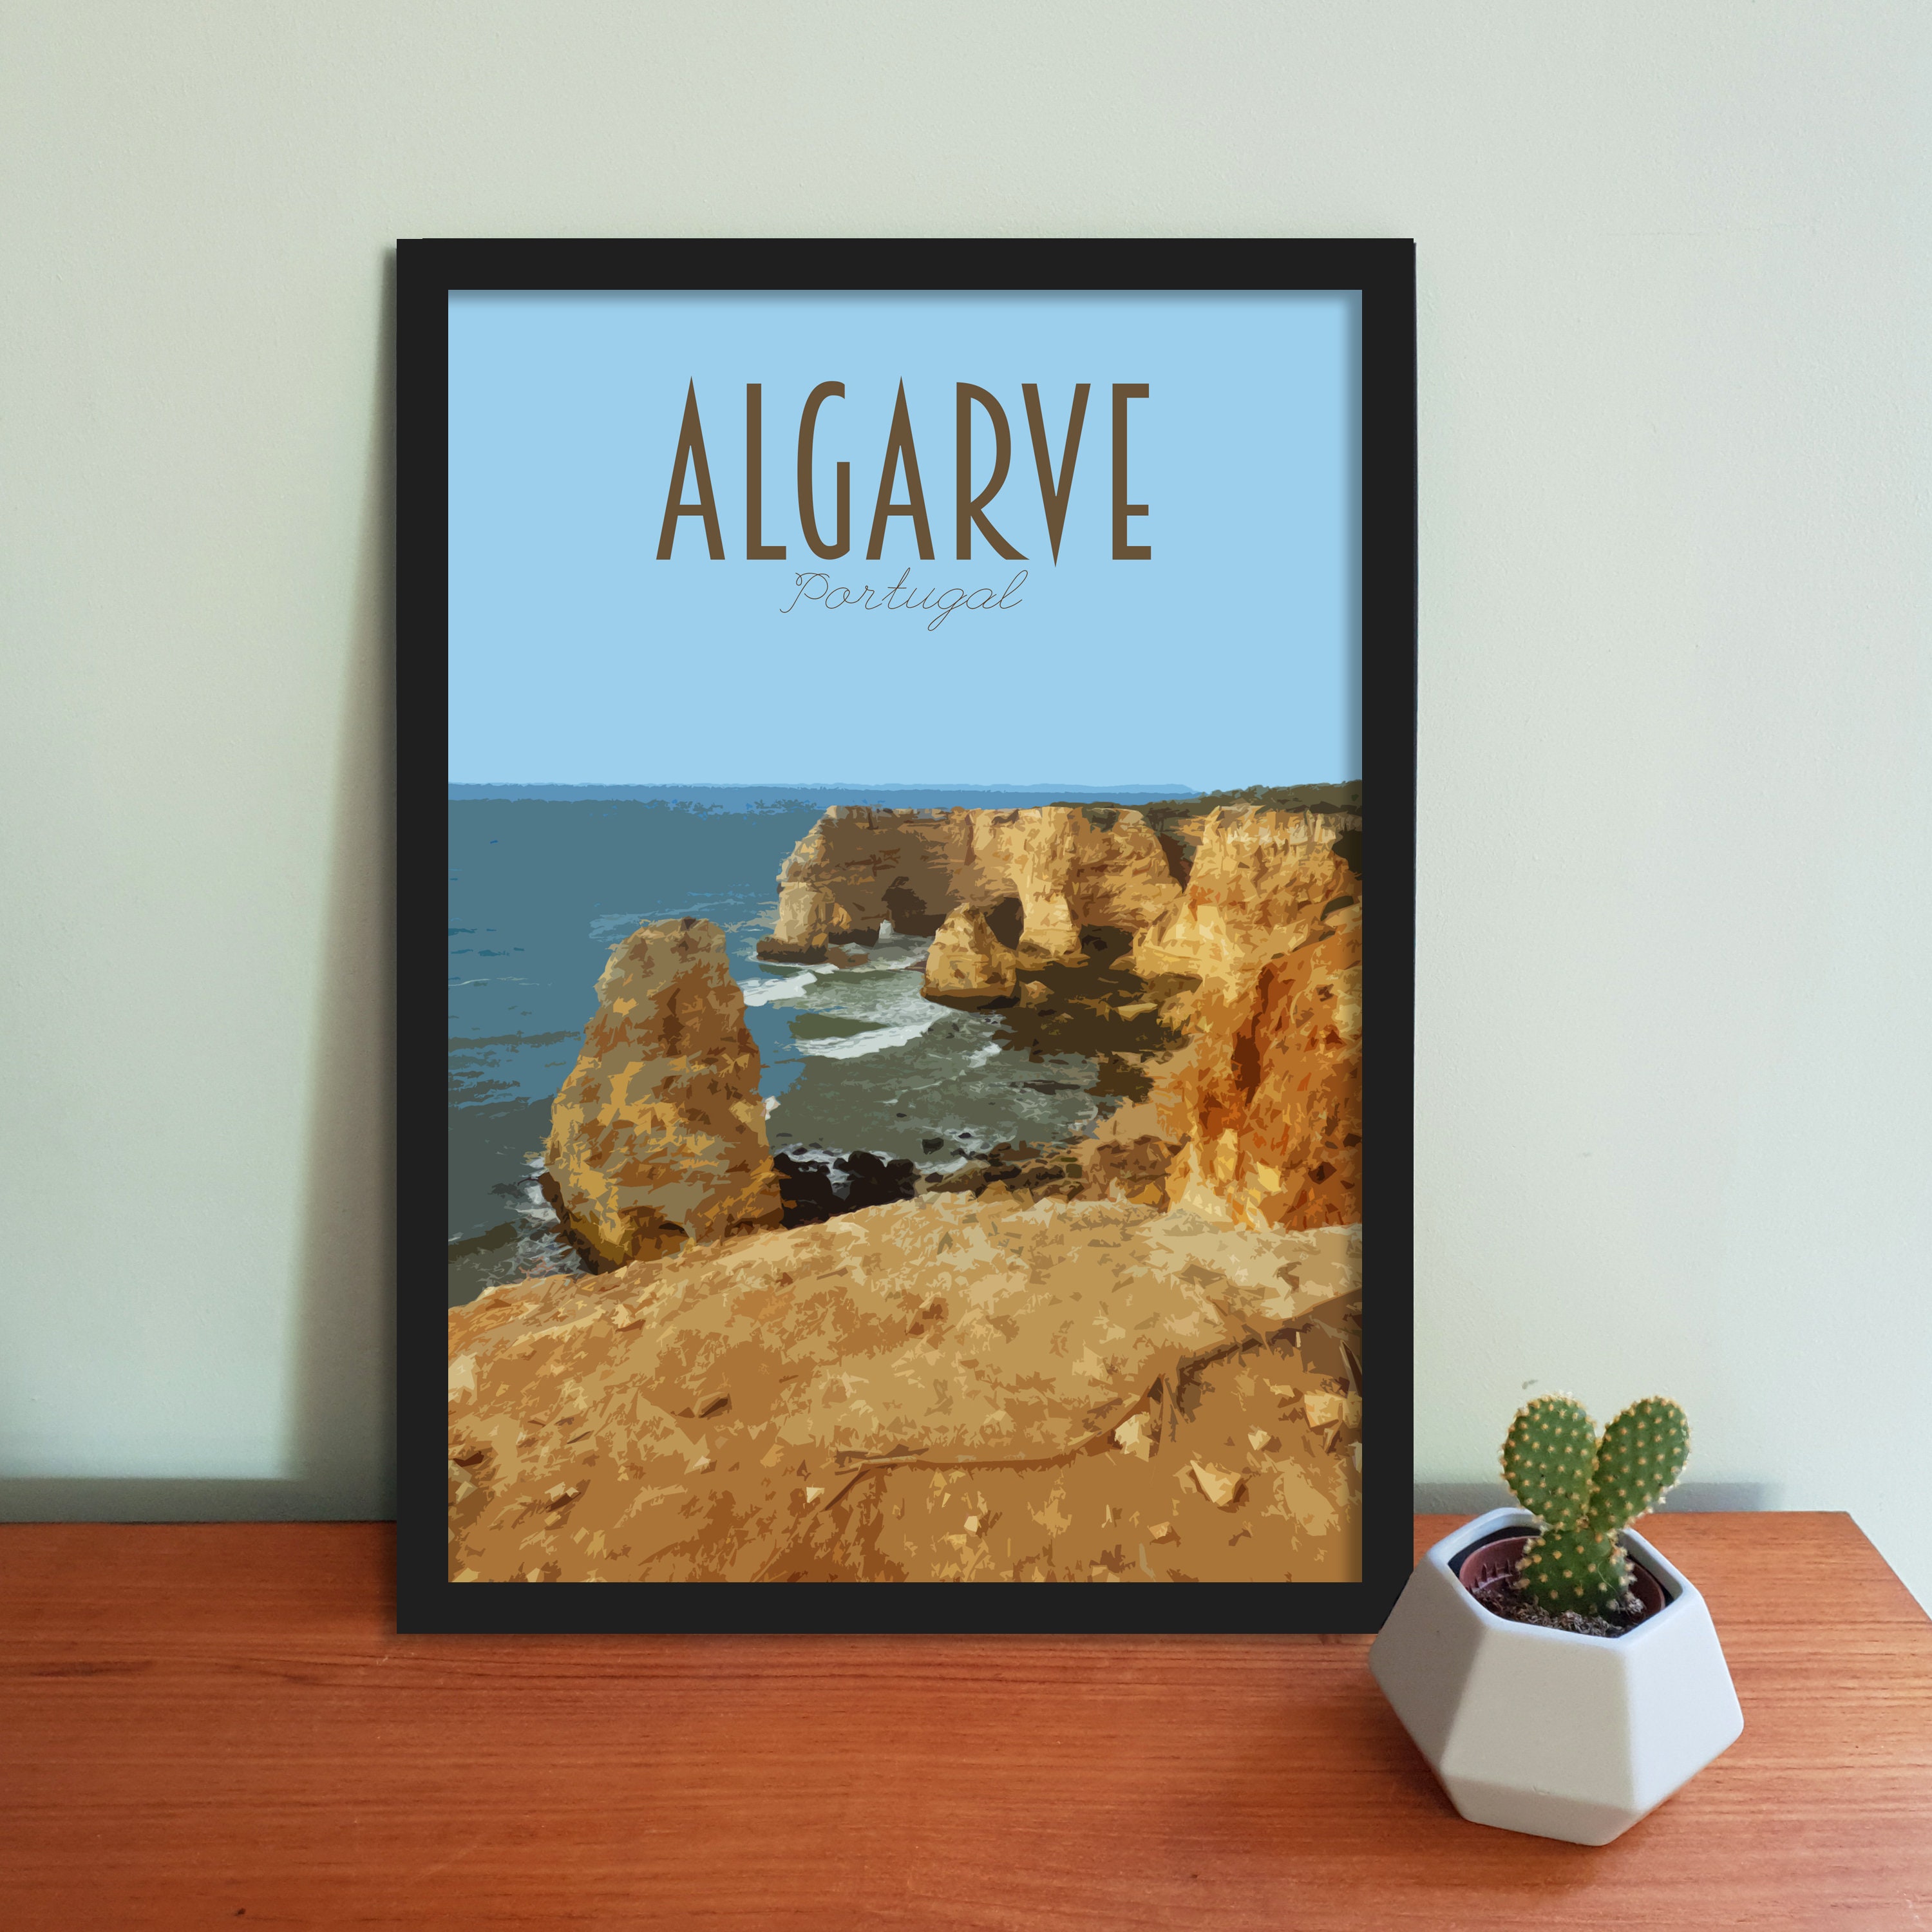 36 BEST places to Visit in Algarve Portugal + free map included!